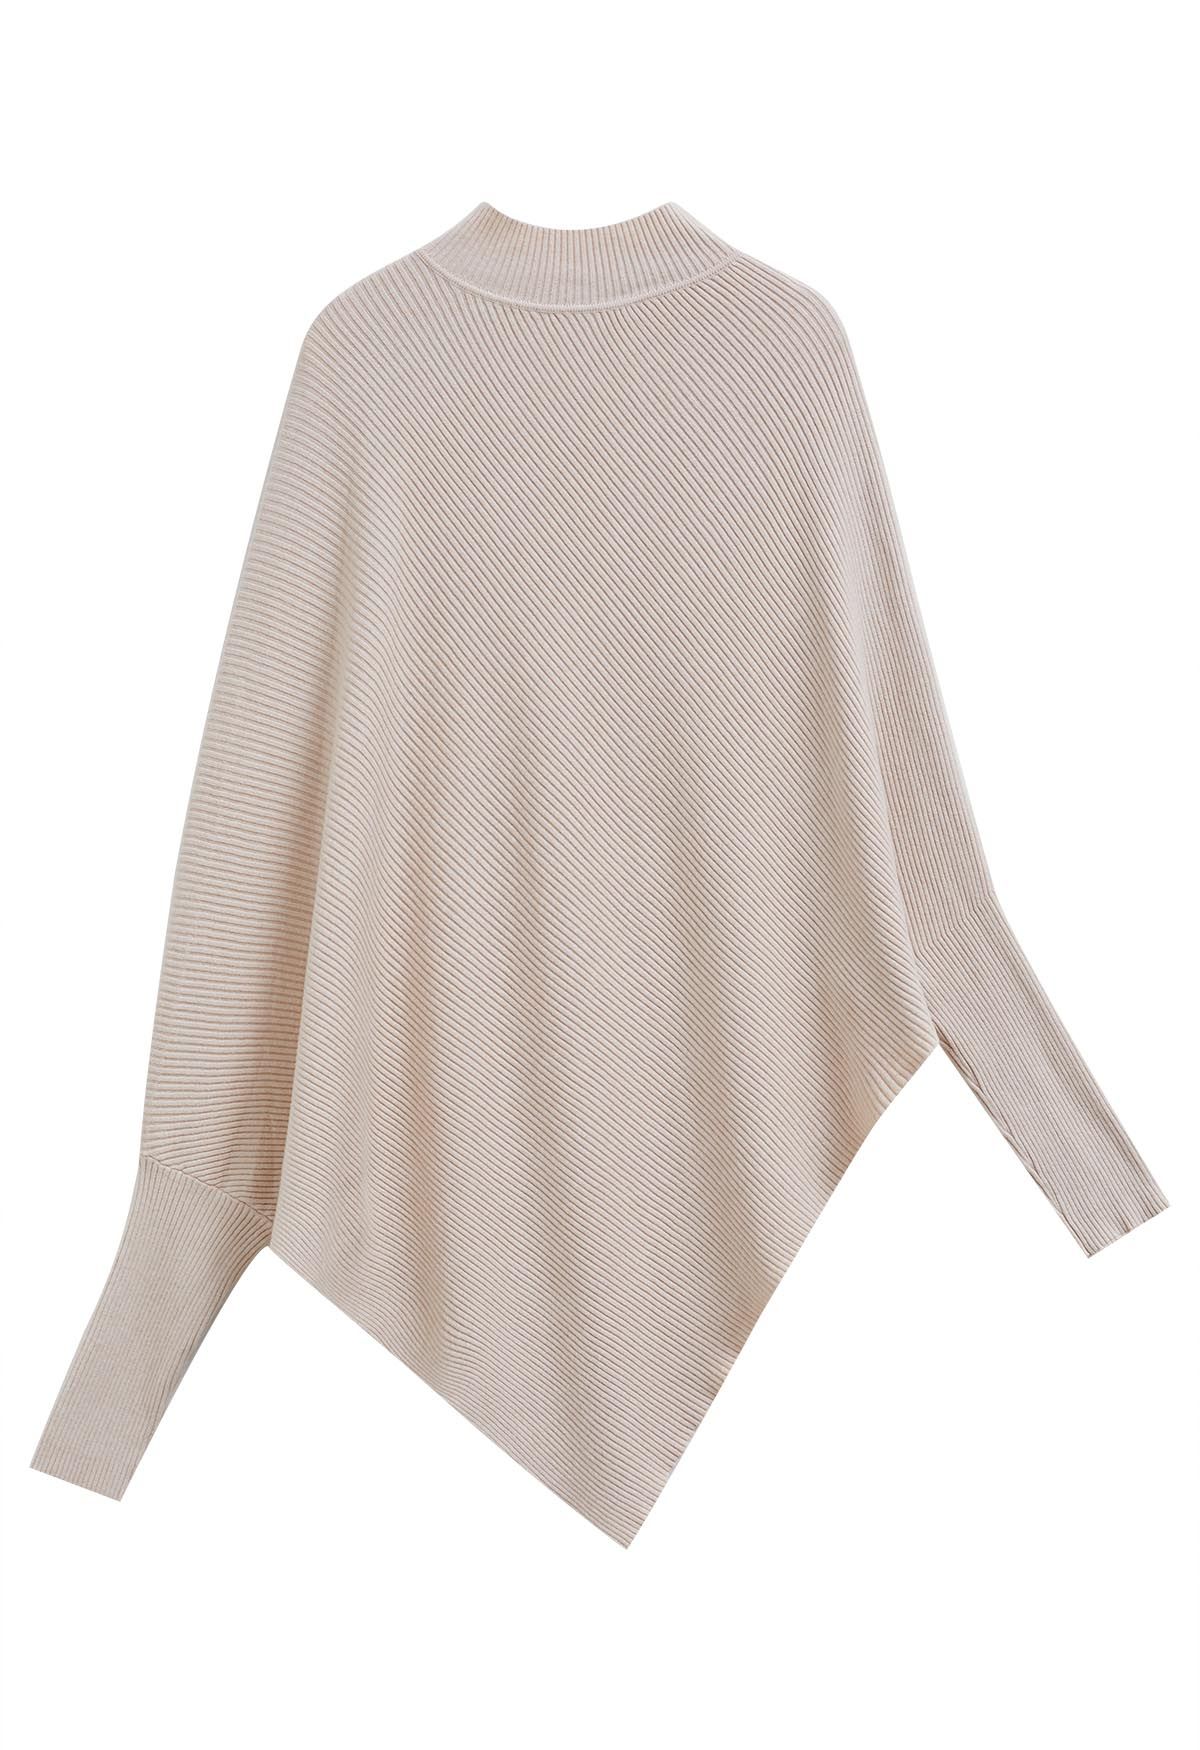 Asymmetric Batwing Sleeve Ribbed Knit Poncho in Oatmeal